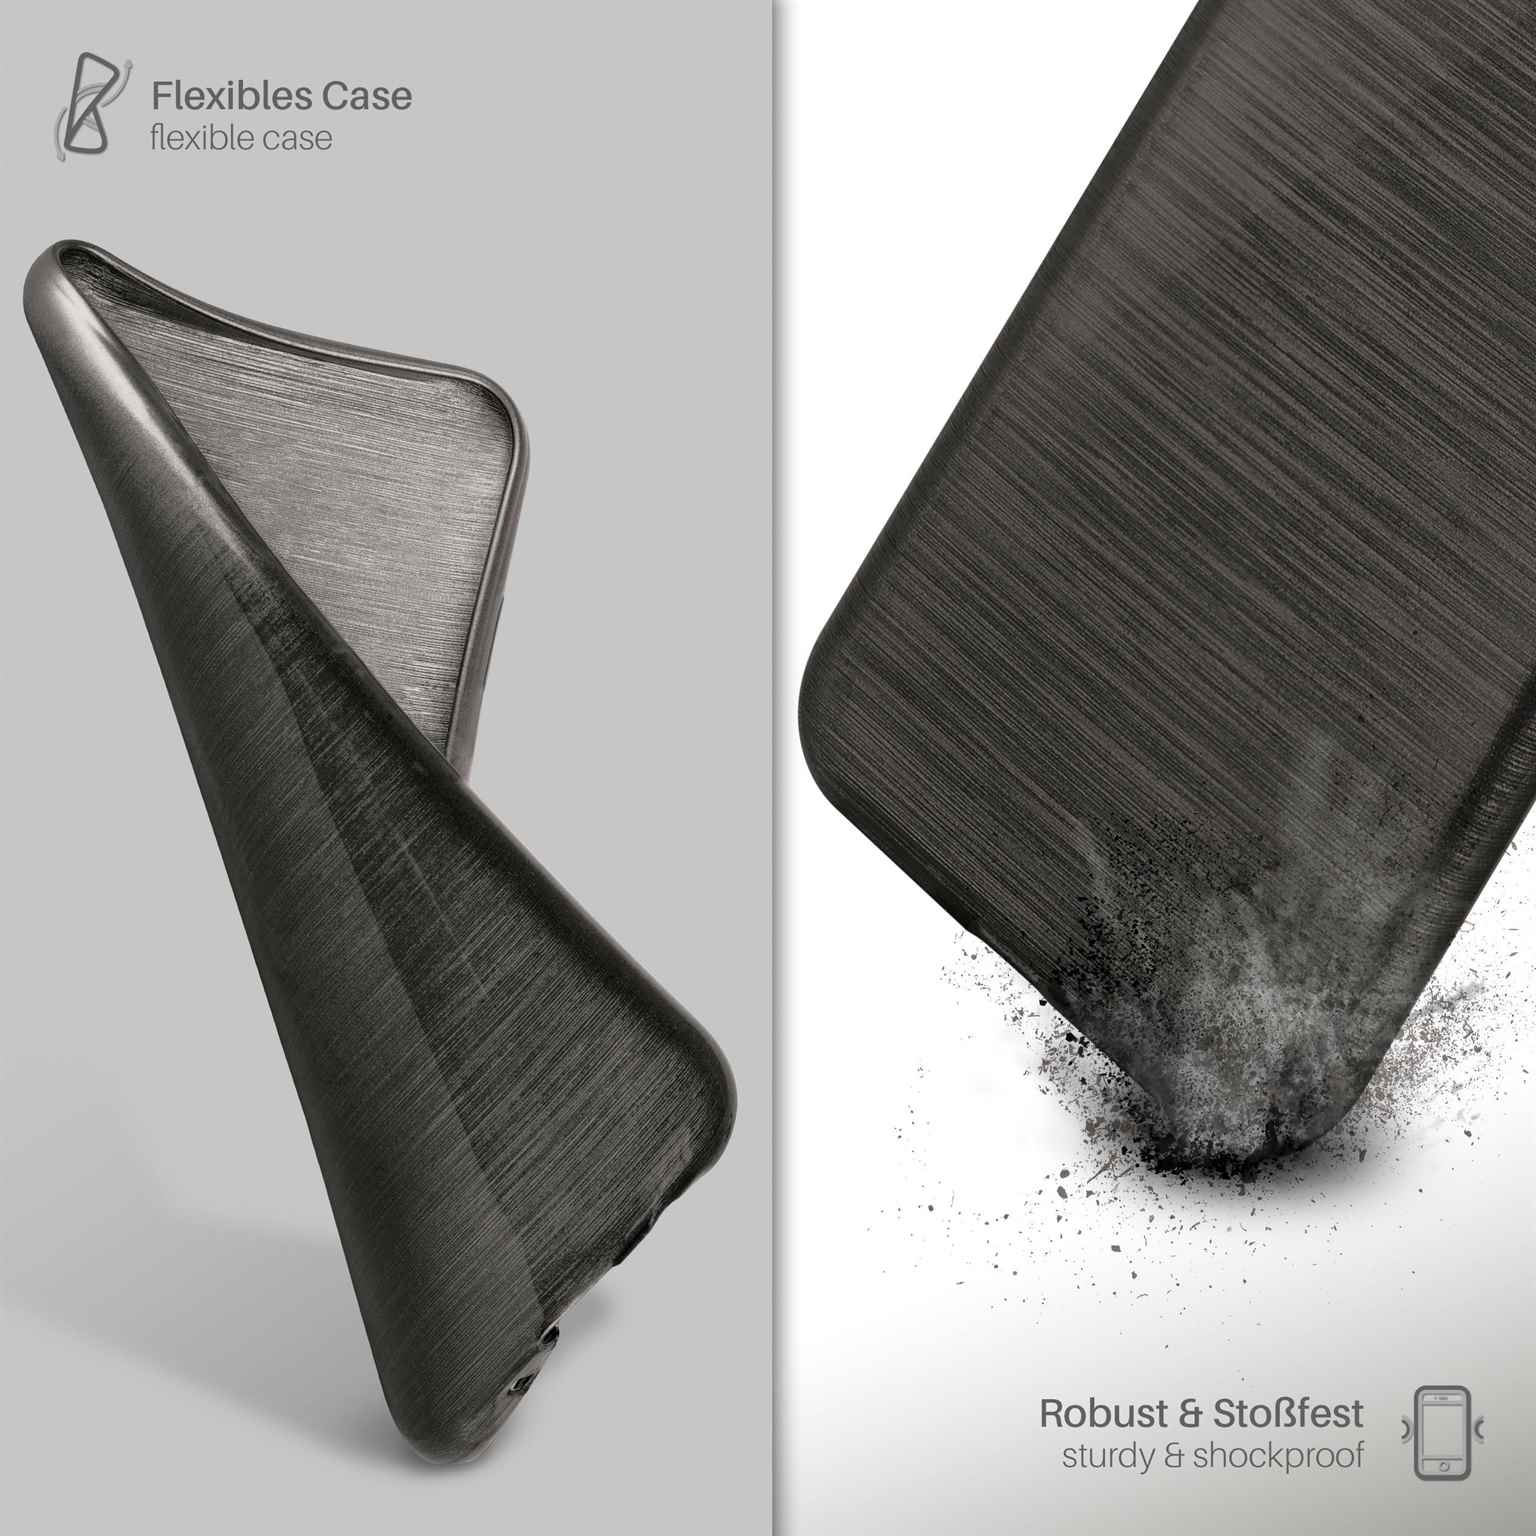 Brushed Backcover, Onyx-Black Apple, X, MOEX iPhone Case,